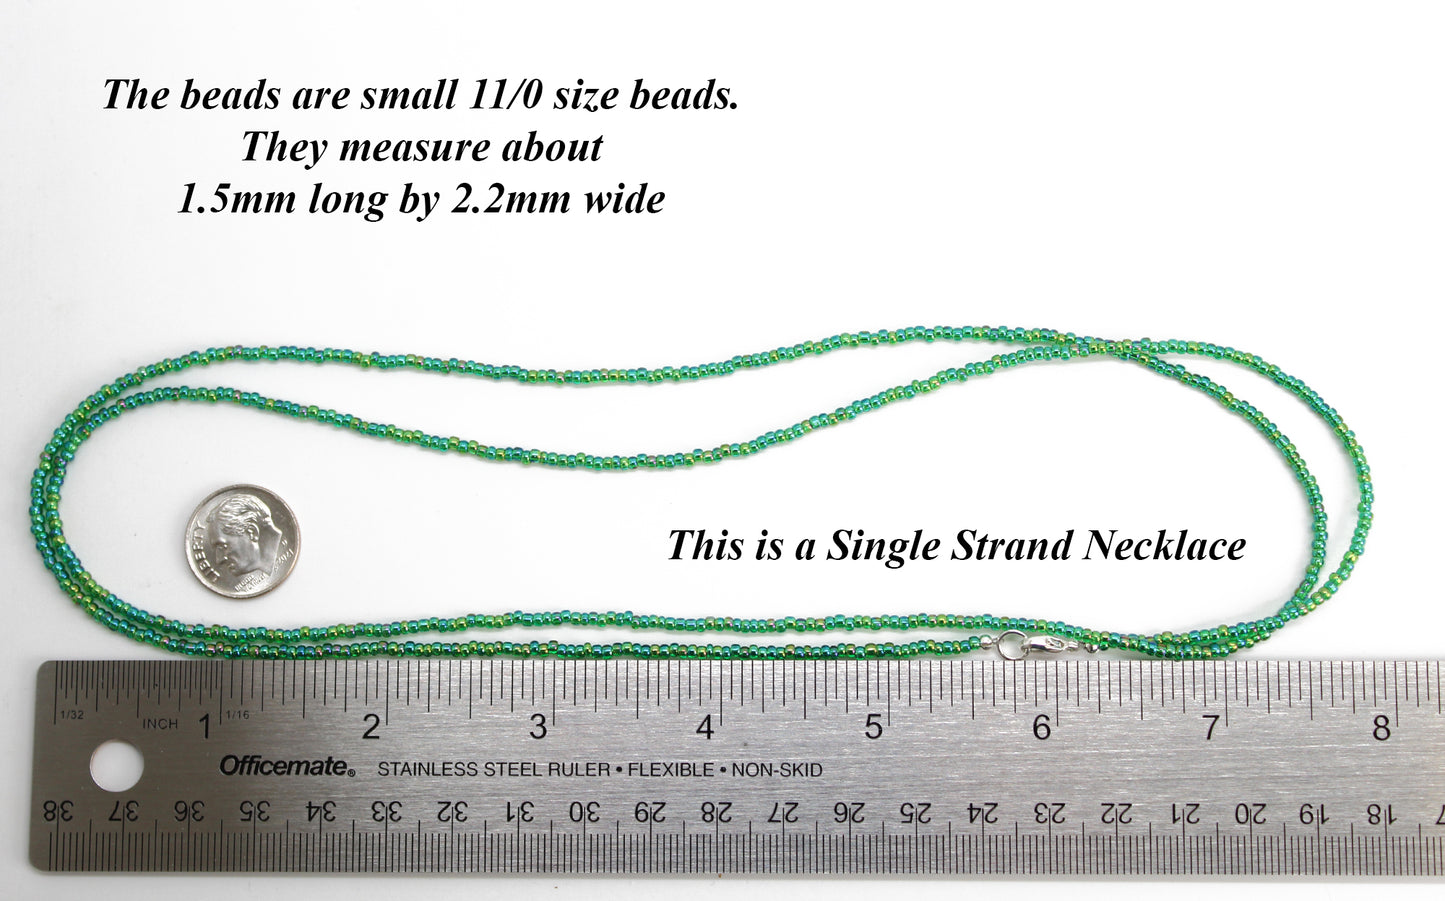 Load image into Gallery viewer, Transparent Rainbow Emerald Green Seed Bead Necklace, Thin 1.5mm Single Strand
